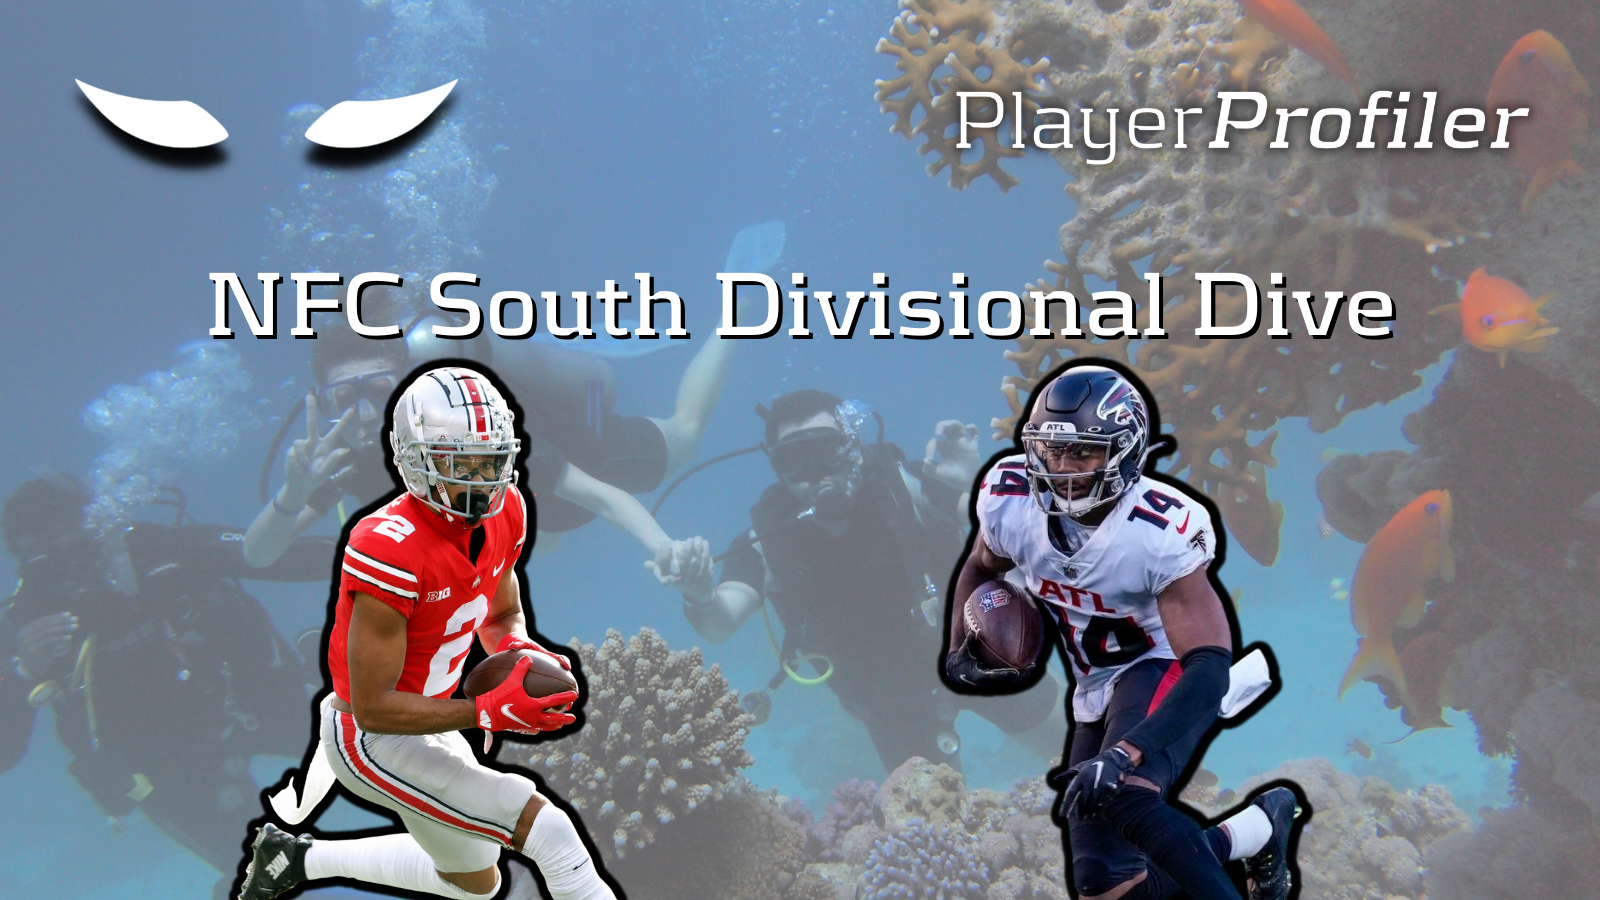 NFC South Divisional Dive